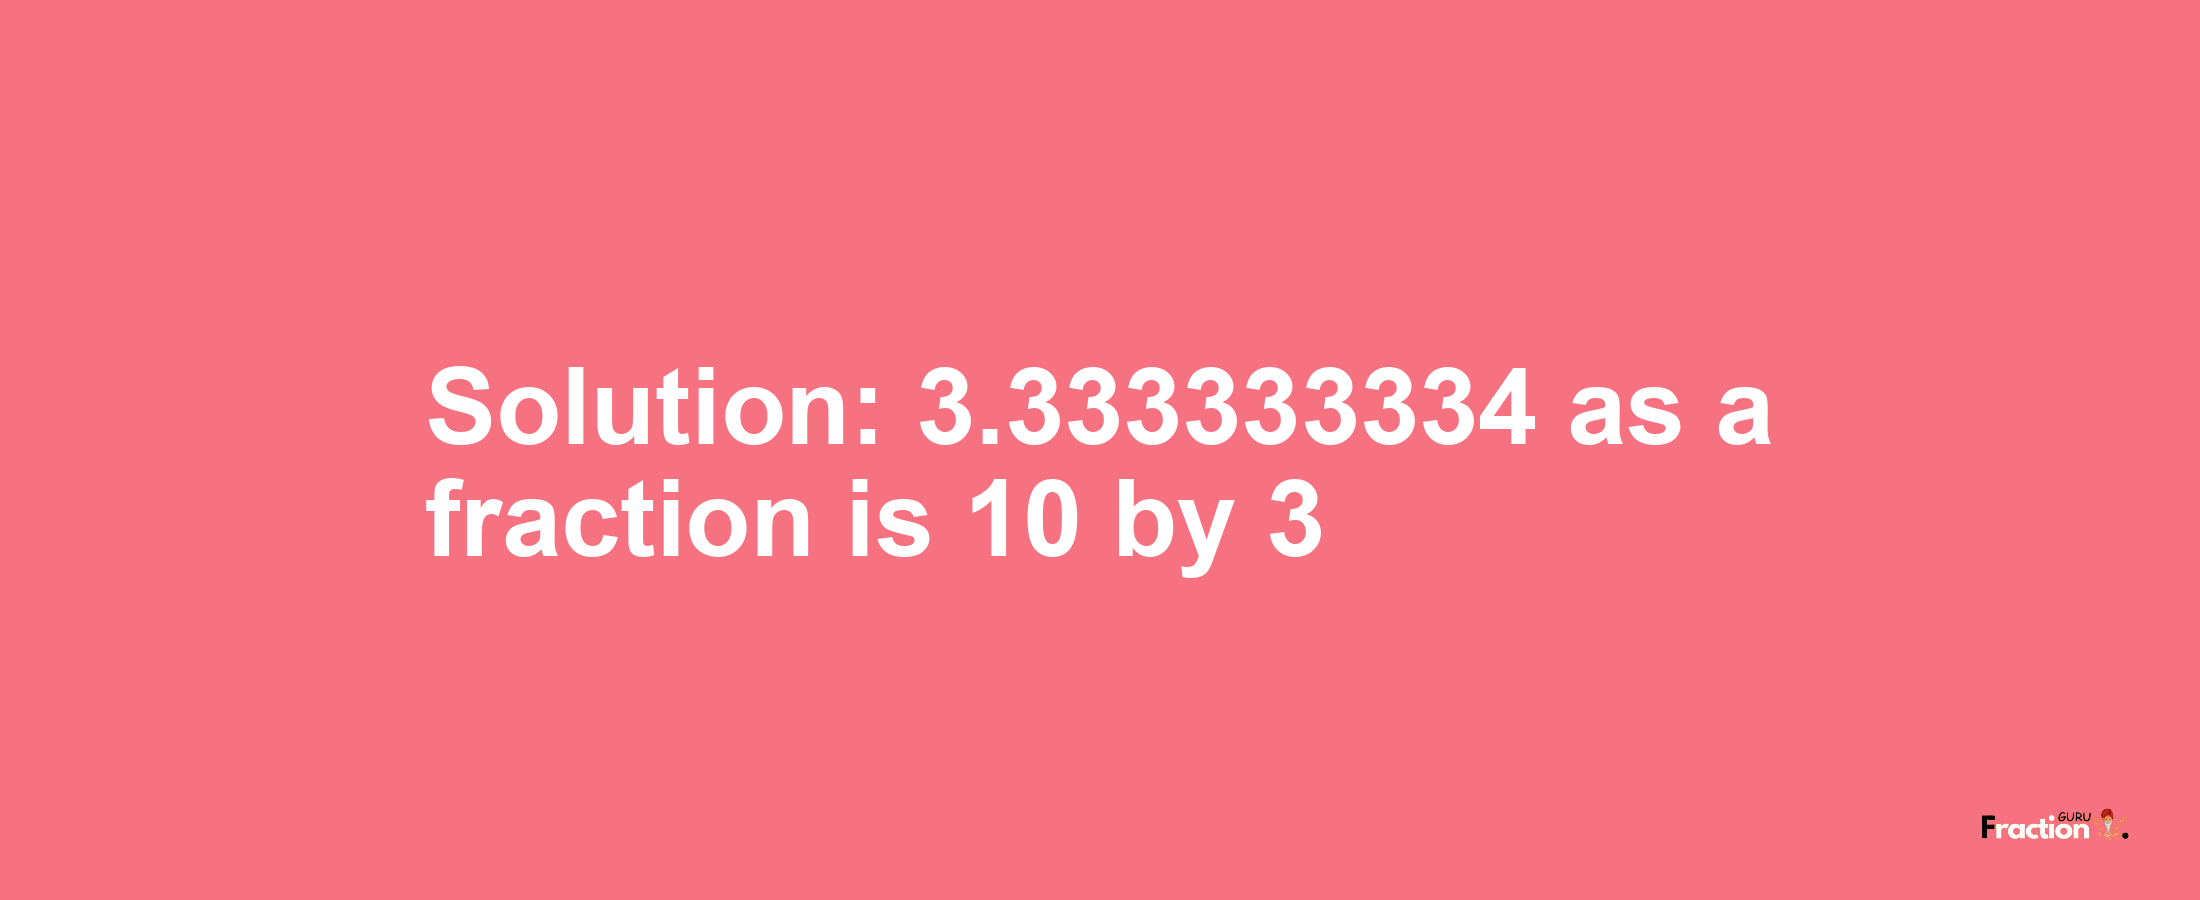 Solution:3.333333334 as a fraction is 10/3